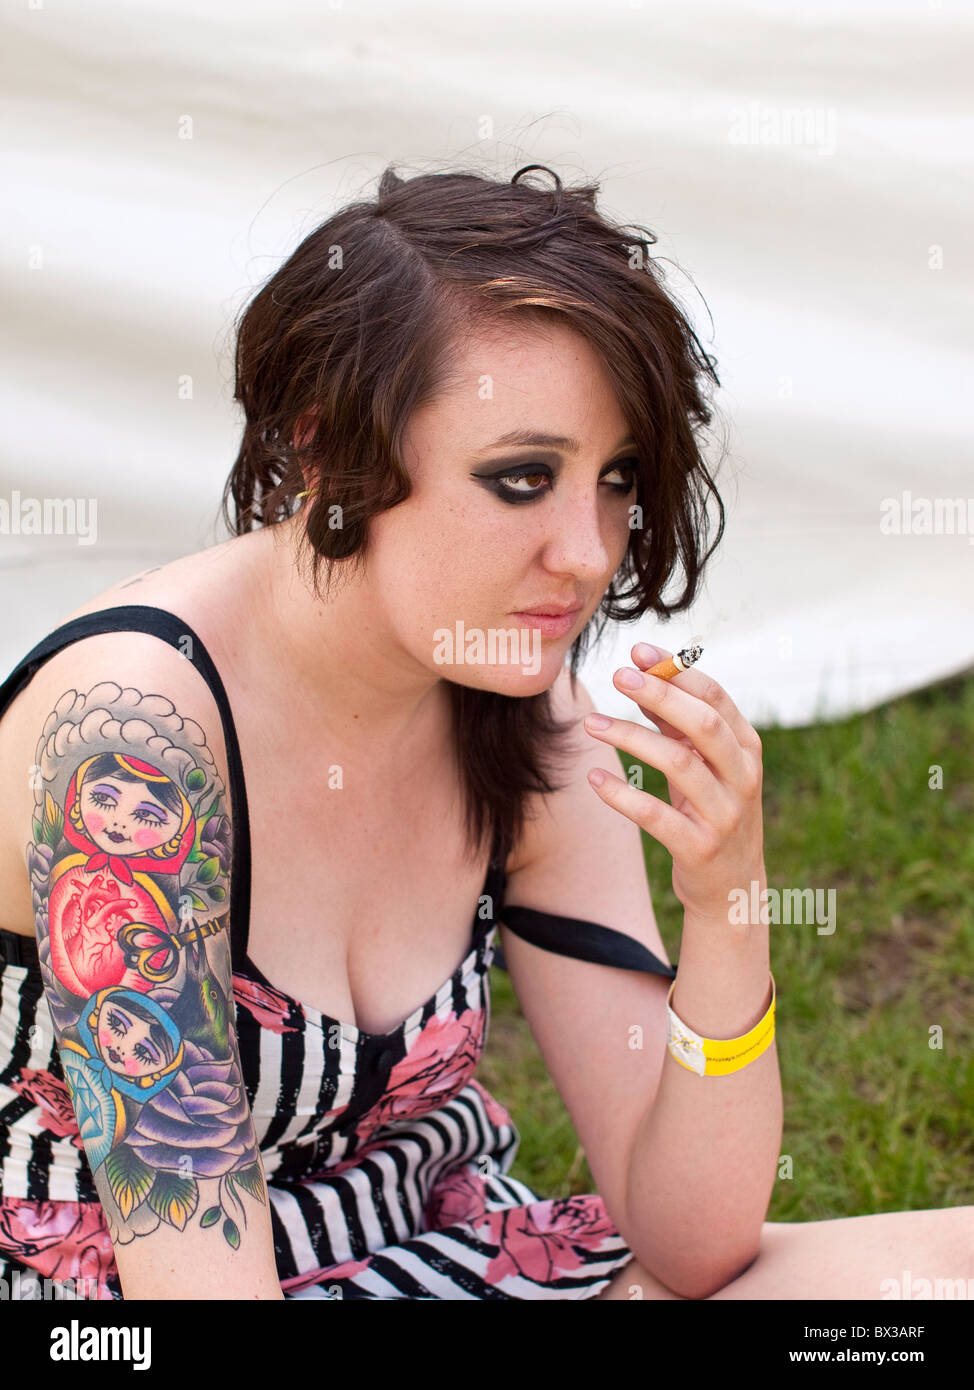 Lucy a trendy young female adult nineteen year old with tattoos smoking Stock Photo